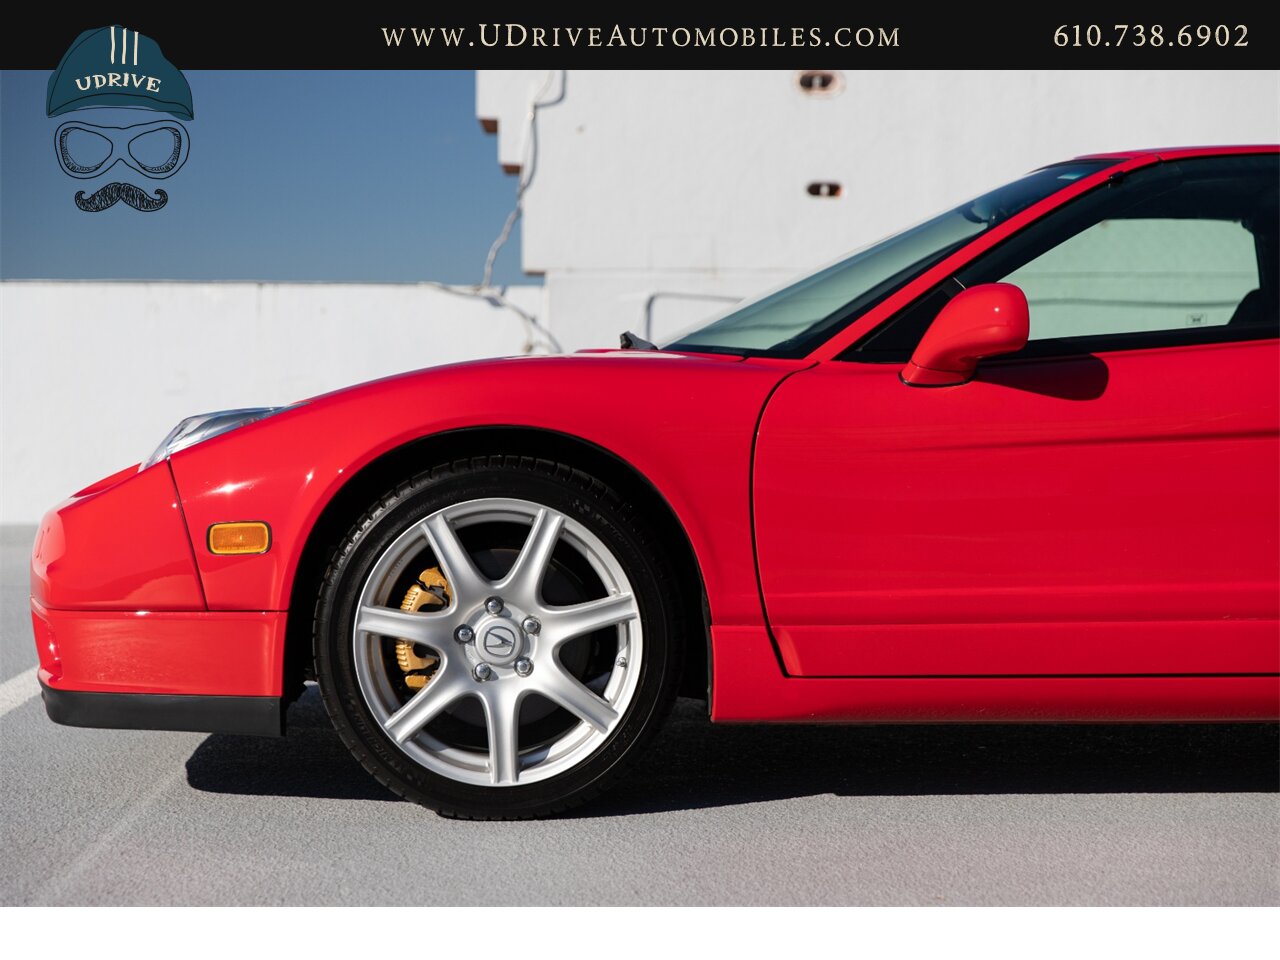 2004 Acura NSX NSX-T 21k mIles Red over Black  Fresh Timing Belt Service - Photo 8 - West Chester, PA 19382